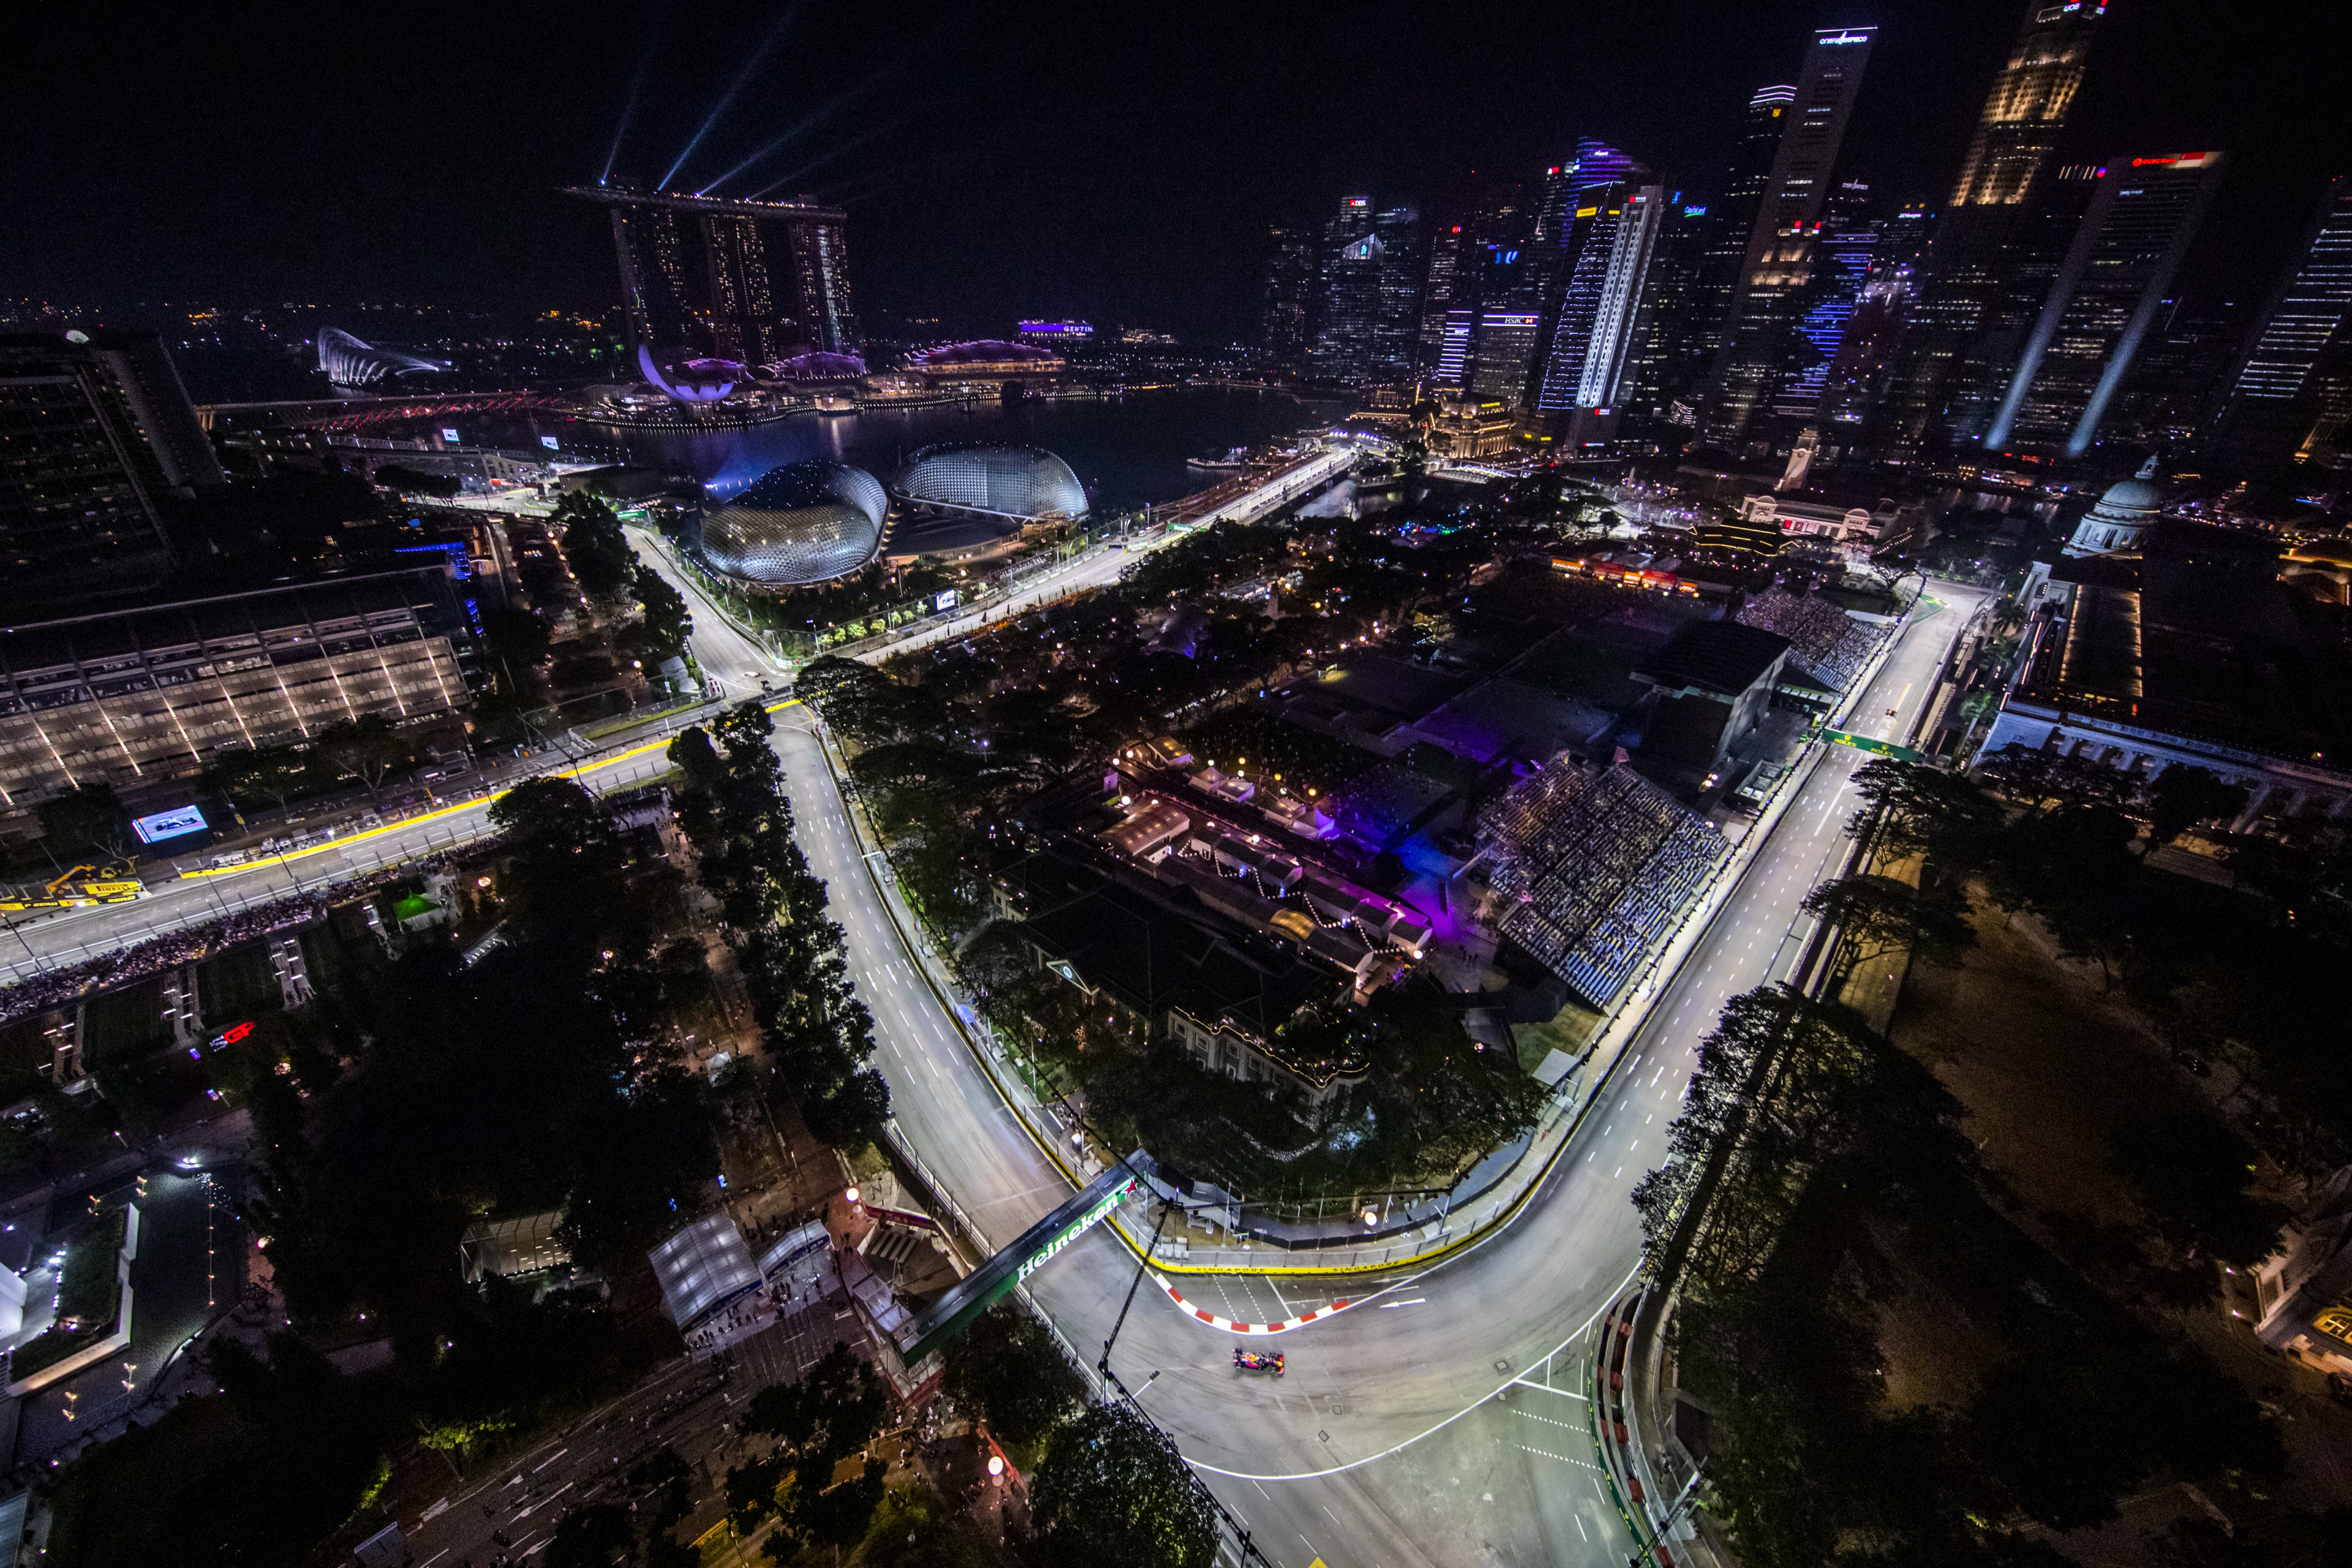 Top Shots 10 Of The Best Images From Singapore Formula 1®